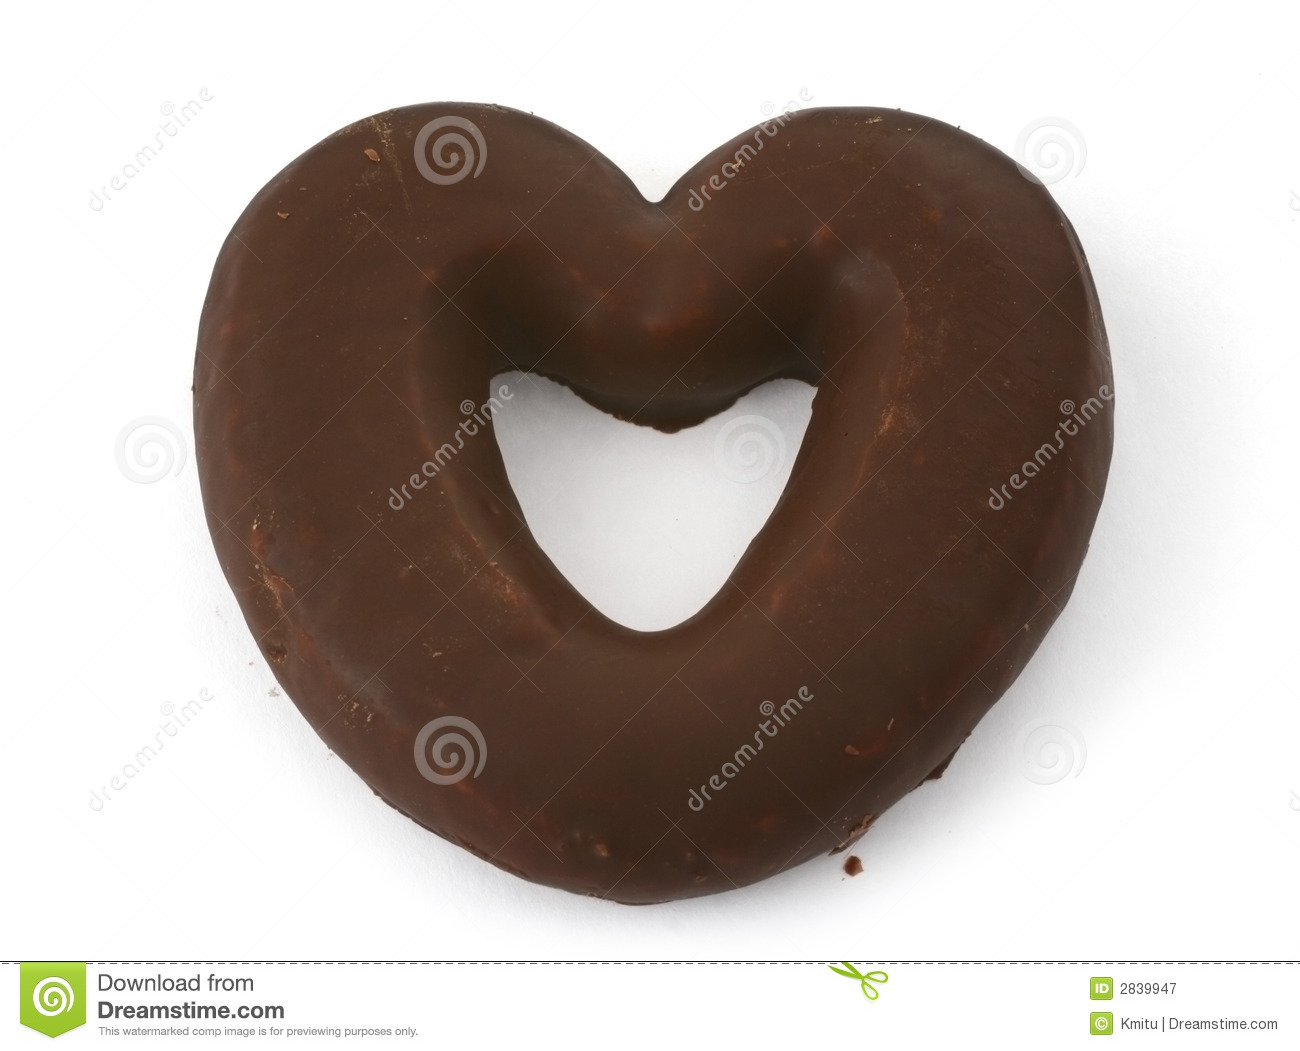 Heart Shaped Cookie Royalty Free Stock Photography   Image  2839947